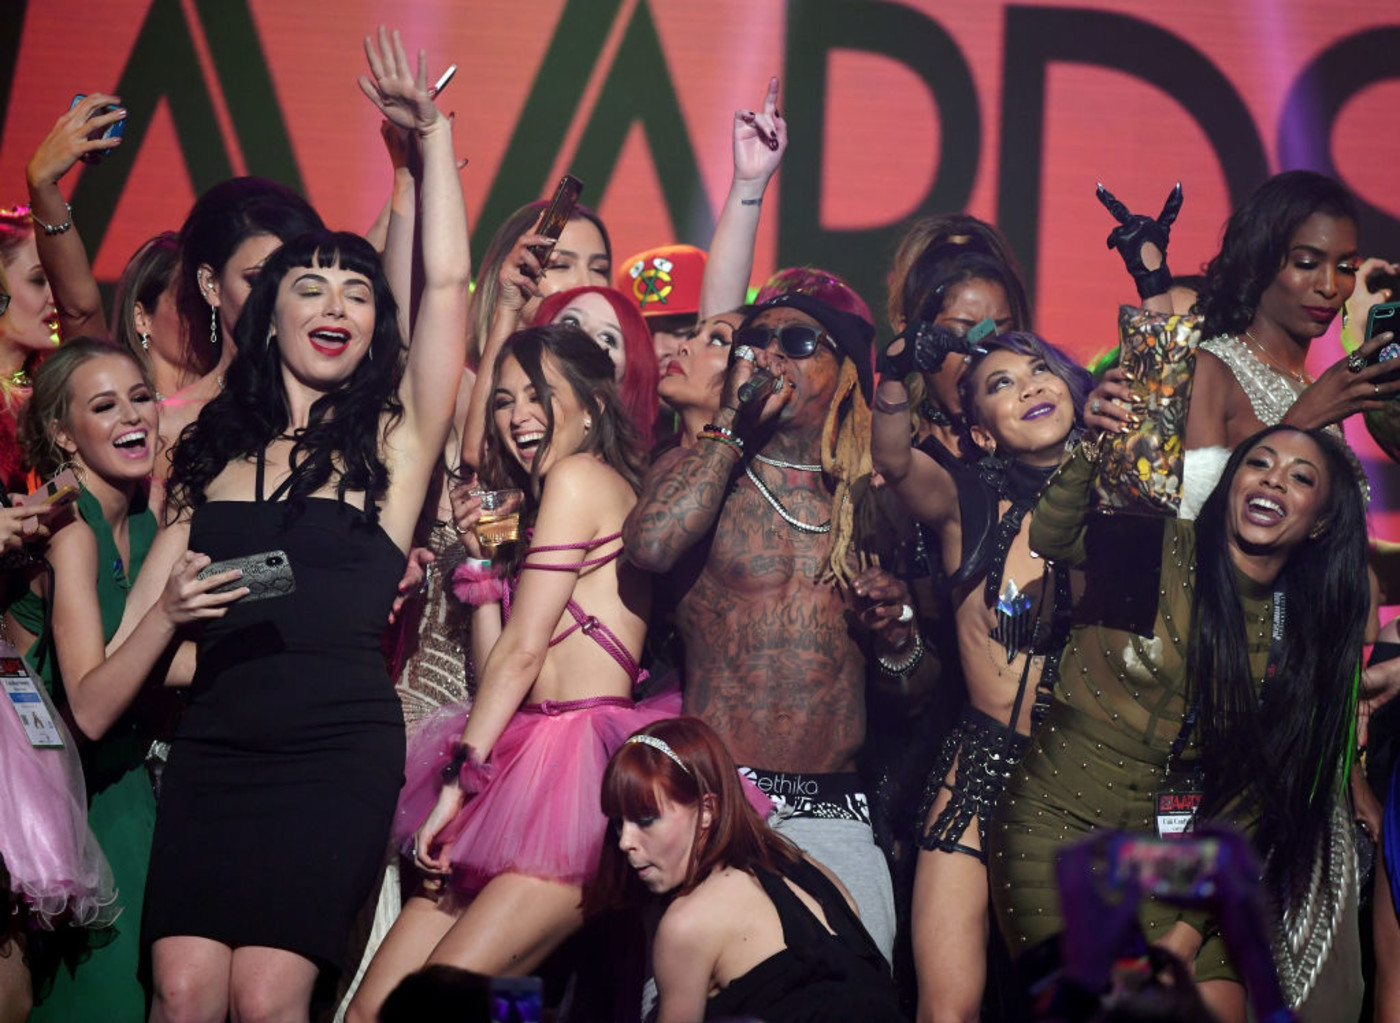 Porn Lil Wayne - Lil Wayne Performed With a Bunch of Porn Stars at the AVN Awards | Complex